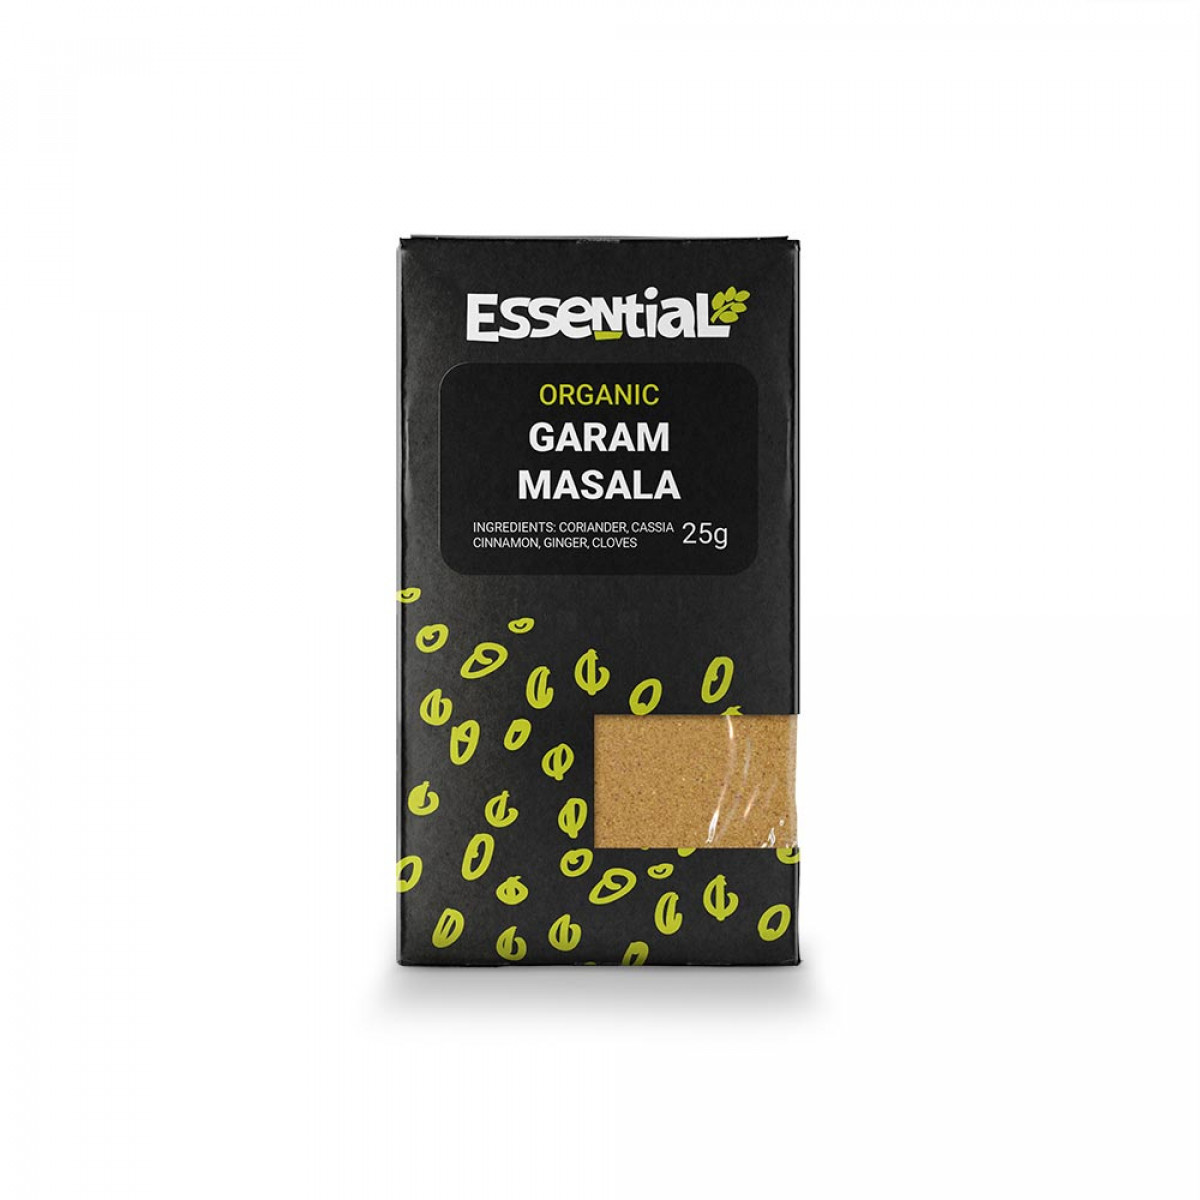 Product picture for Garam Masala